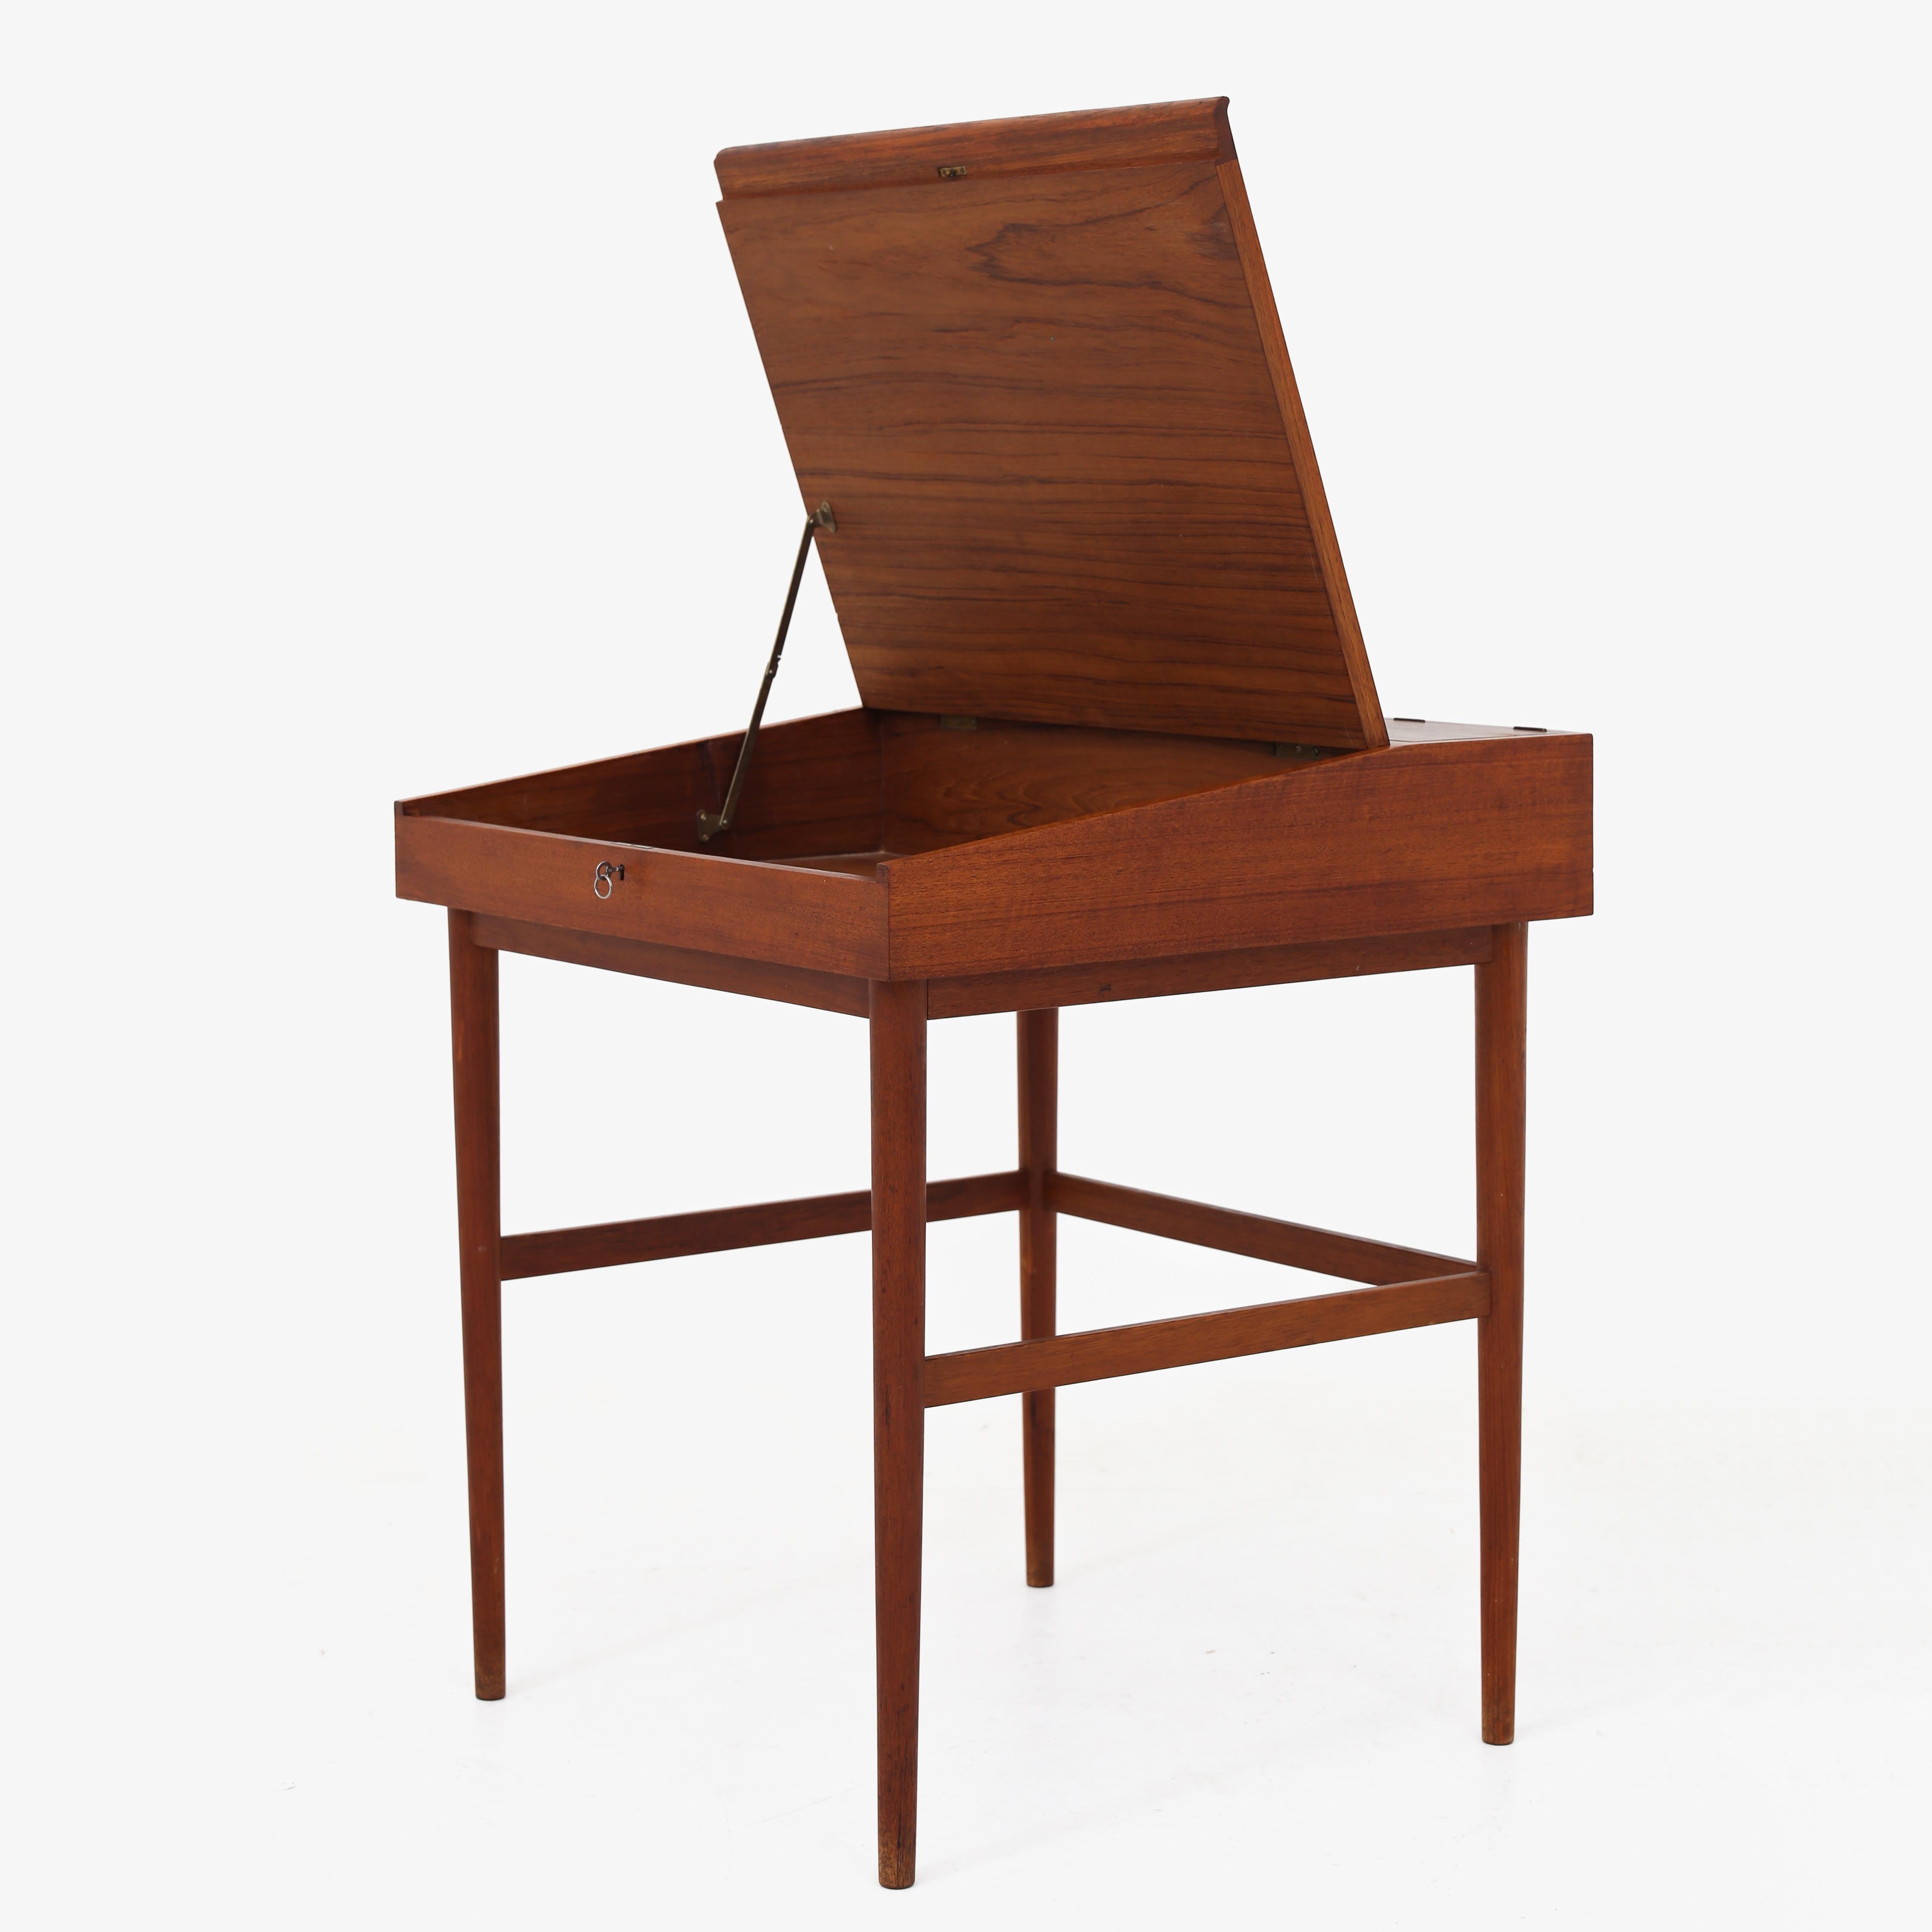 NV 40 - Rare writing desk with slanted desk top with grooved edge, and three doors with brass handles for three storage compartments. Finn Juhl / Niels Vodder